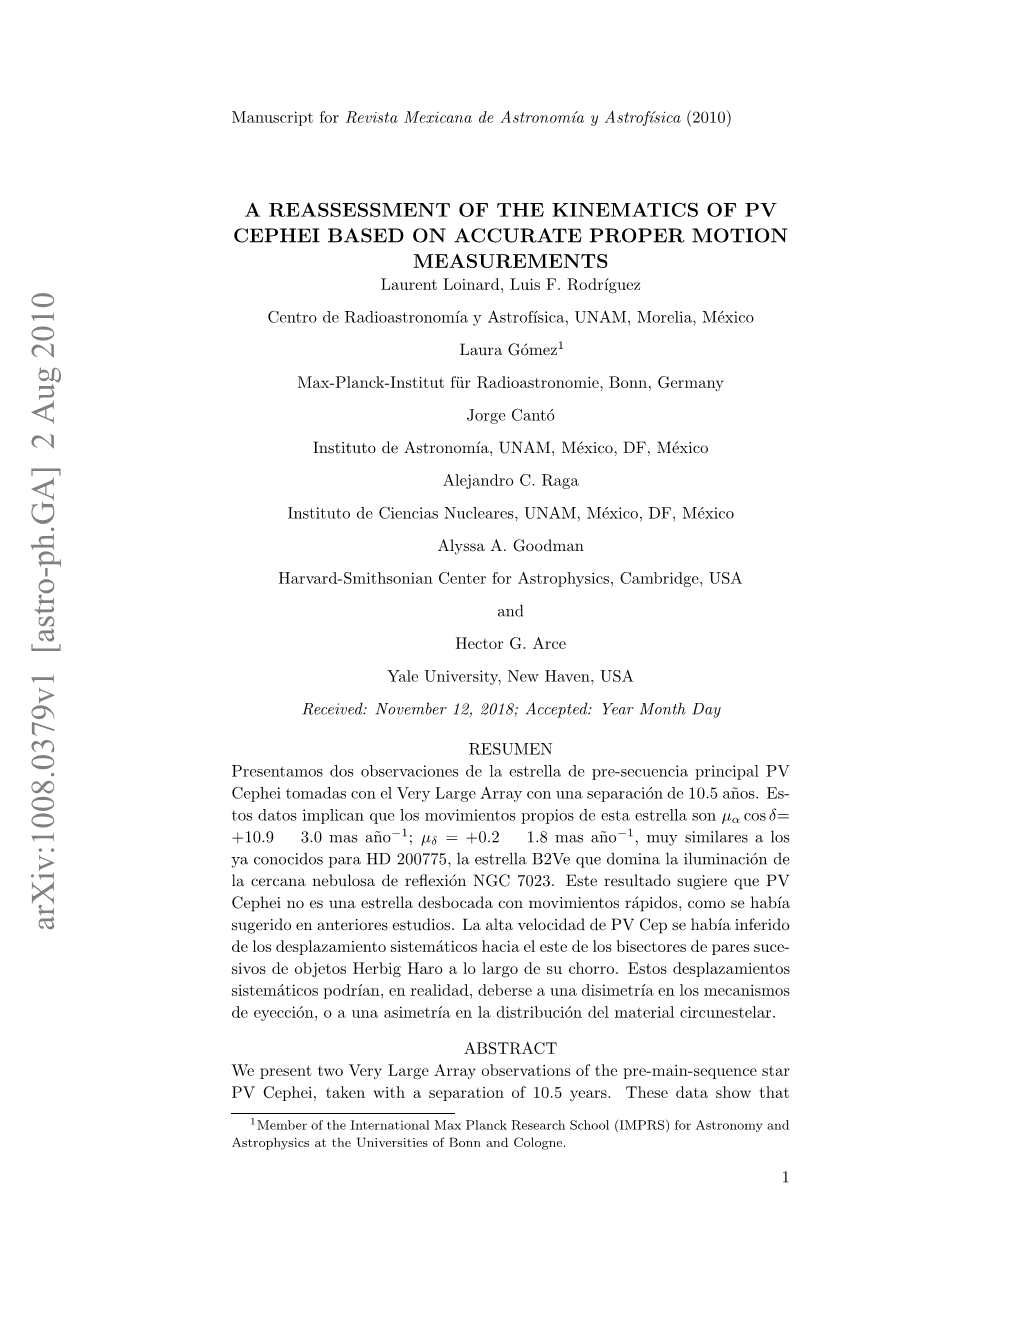 A Reassessment of the Kinematics of PV Cephei Based on Accurate